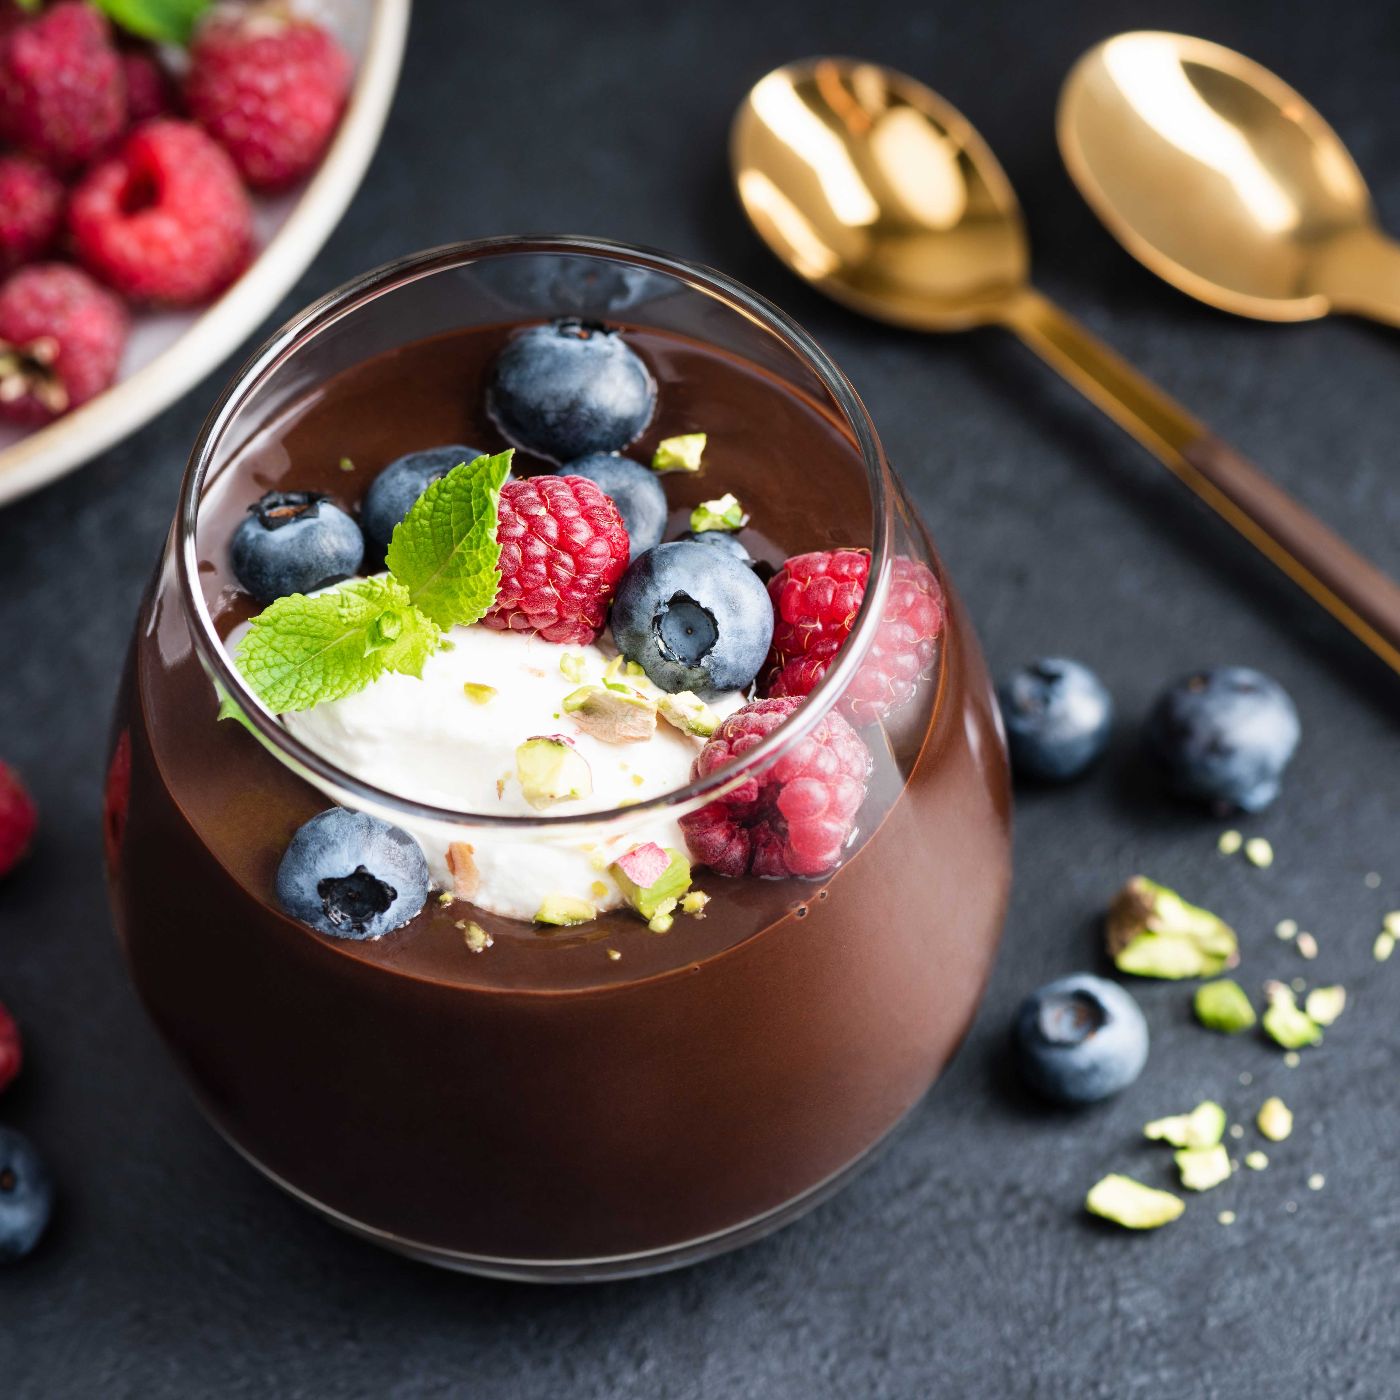 Dark-chocolate-mousse-with-berries-and-cream-1332130301_7360x4912 square.jpeg